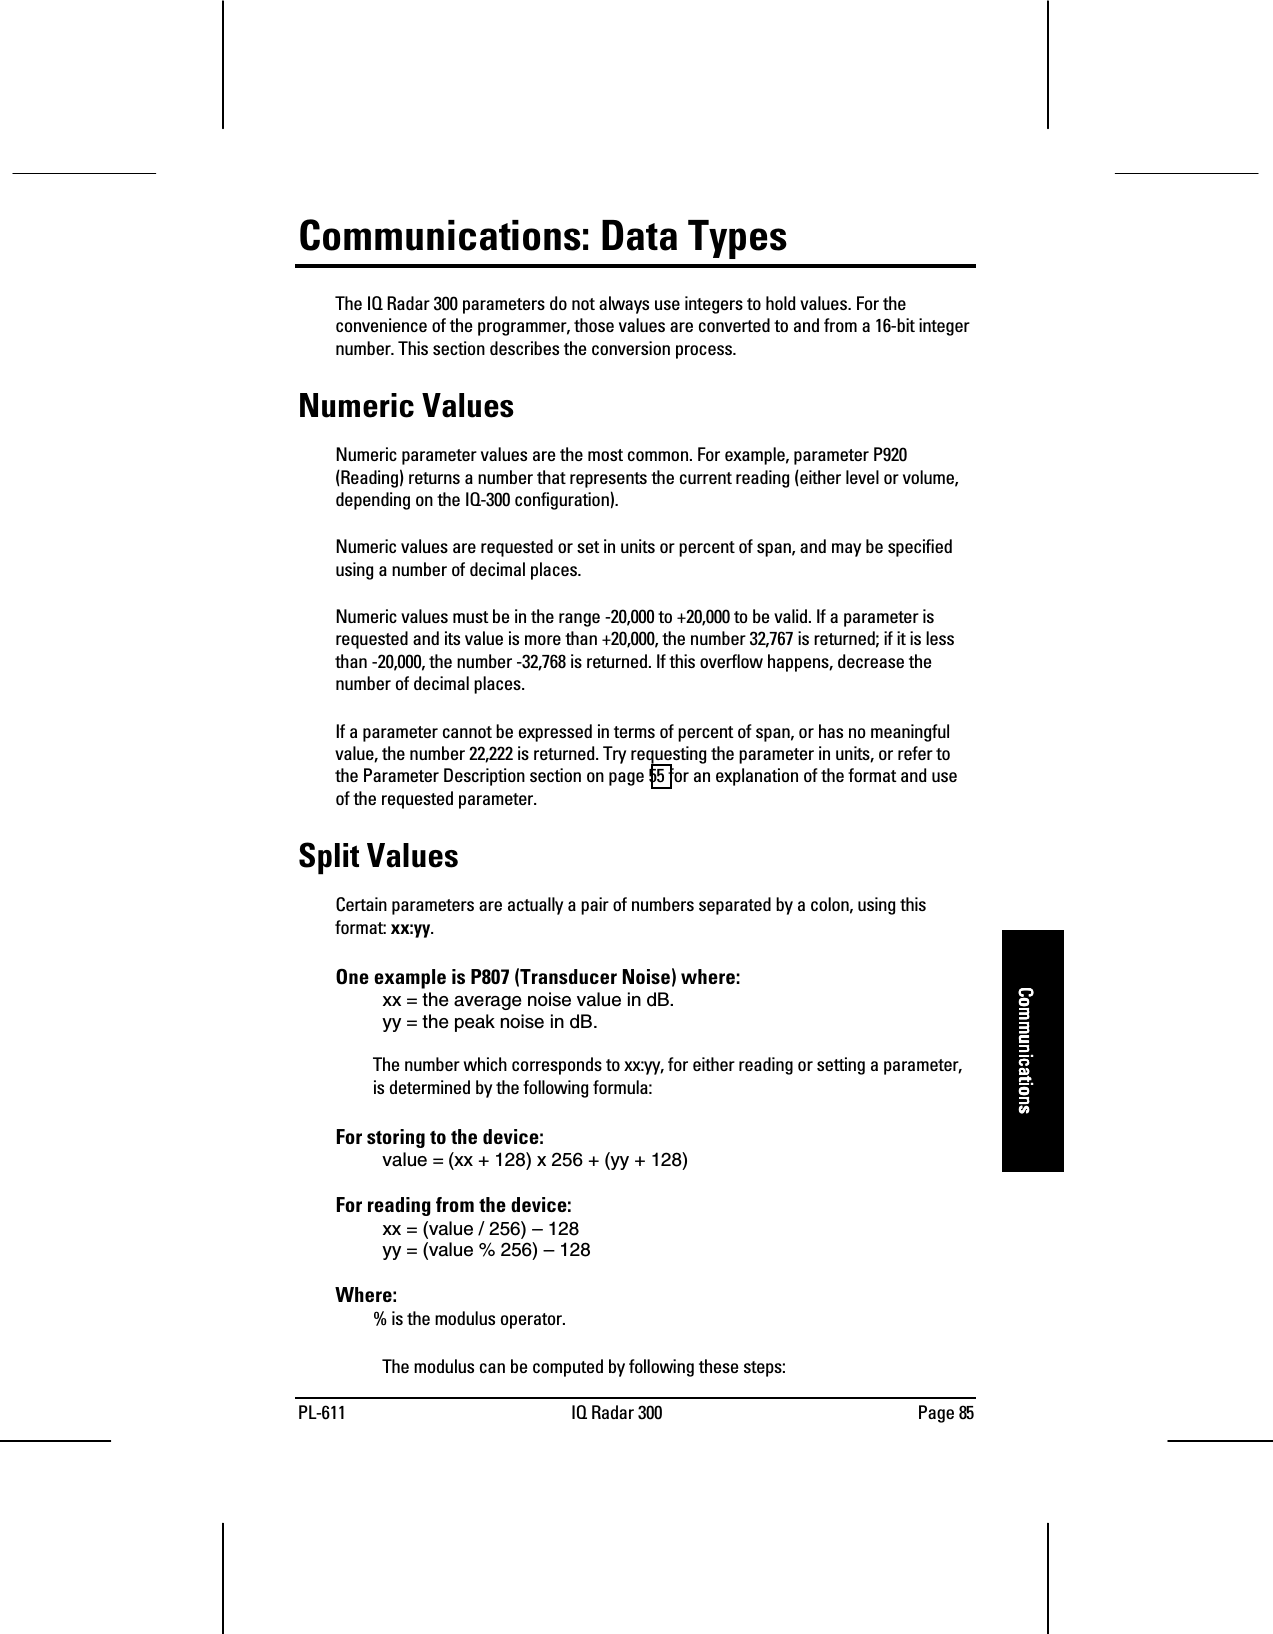 PL-611 IQ Radar 300 Page 85CommunicationsCommunicationsCommunicationsCommunicationsCommunications: Data TypesThe IQ Radar 300 parameters do not always use integers to hold values. For theconvenience of the programmer, those values are converted to and from a 16-bit integernumber. This section describes the conversion process.Numeric ValuesNumeric parameter values are the most common. For example, parameter P920(Reading) returns a number that represents the current reading (either level or volume,depending on the IQ-300 configuration).Numeric values are requested or set in units or percent of span, and may be specifiedusing a number of decimal places.Numeric values must be in the range -20,000 to +20,000 to be valid. If a parameter isrequested and its value is more than +20,000, the number 32,767 is returned; if it is lessthan -20,000, the number -32,768 is returned. If this overflow happens, decrease thenumber of decimal places.If a parameter cannot be expressed in terms of percent of span, or has no meaningfulvalue, the number 22,222 is returned. Try requesting the parameter in units, or refer tothe Parameter Description section on page 55 for an explanation of the format and useof the requested parameter.Split ValuesCertain parameters are actually a pair of numbers separated by a colon, using thisformat: xx:yy.One example is P807 (Transducer Noise) where:xx = the average noise value in dB.yy = the peak noise in dB.The number which corresponds to xx:yy, for either reading or setting a parameter,is determined by the following formula:For storing to the device:value = (xx + 128) x 256 + (yy + 128)For reading from the device:xx = (value / 256) – 128yy = (value % 256) – 128Where:% is the modulus operator.The modulus can be computed by following these steps: